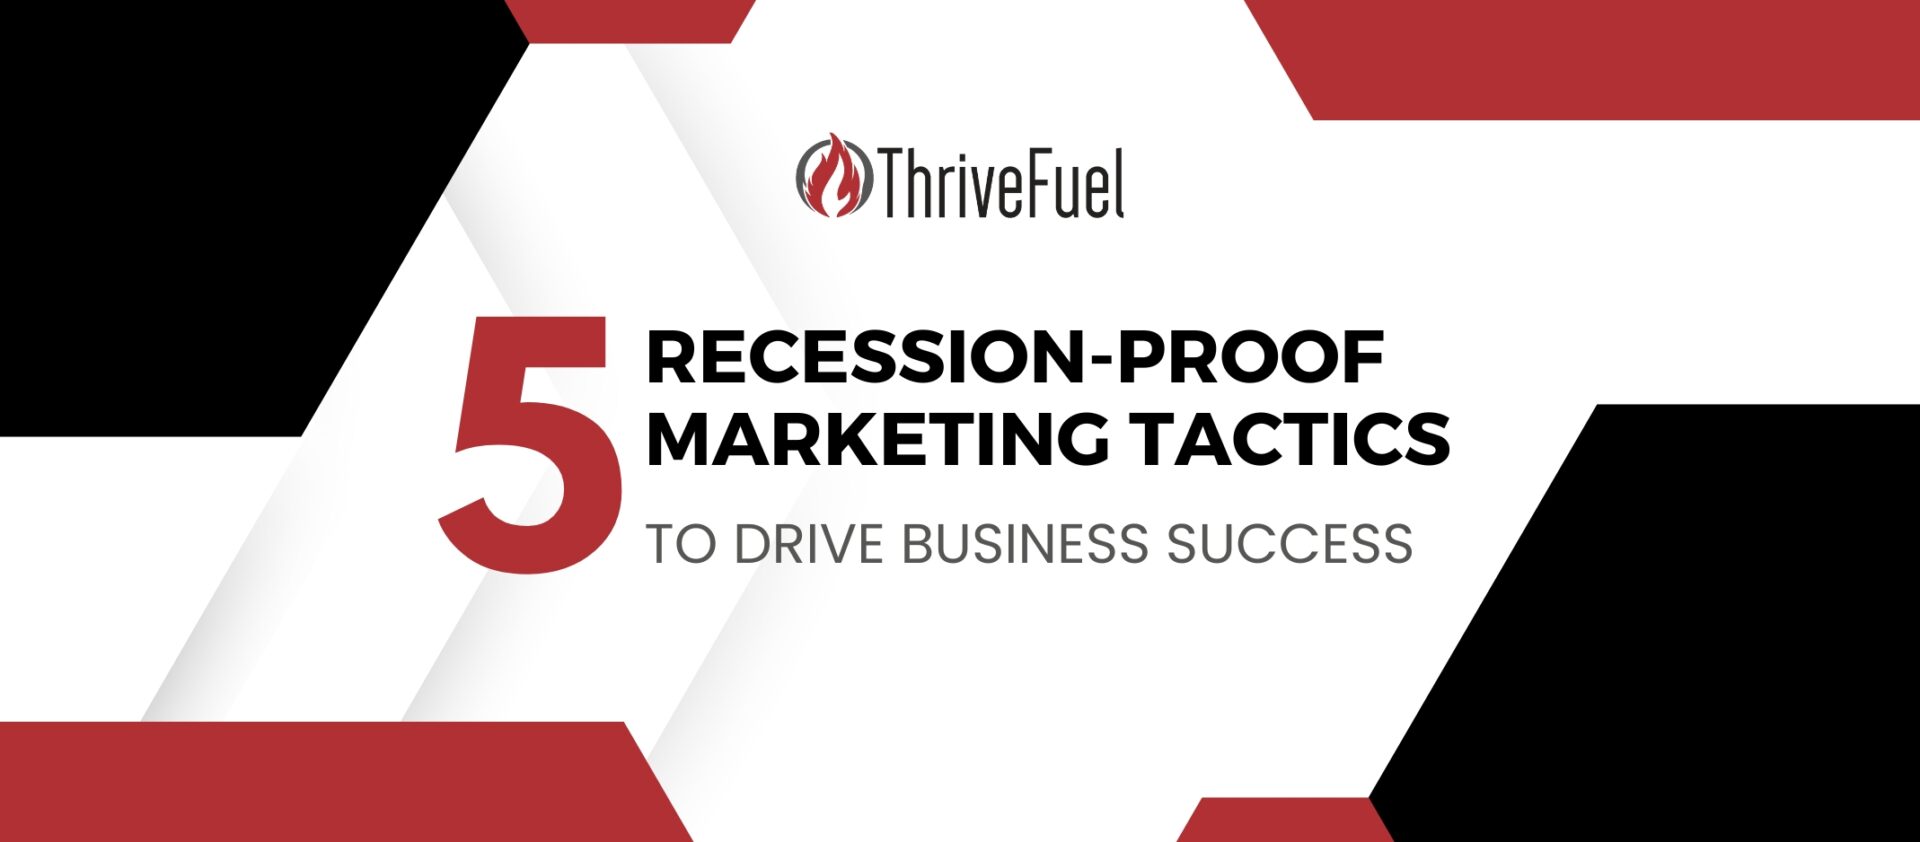 5 Recession-Proof Marketing Tactics to Drive Business Success